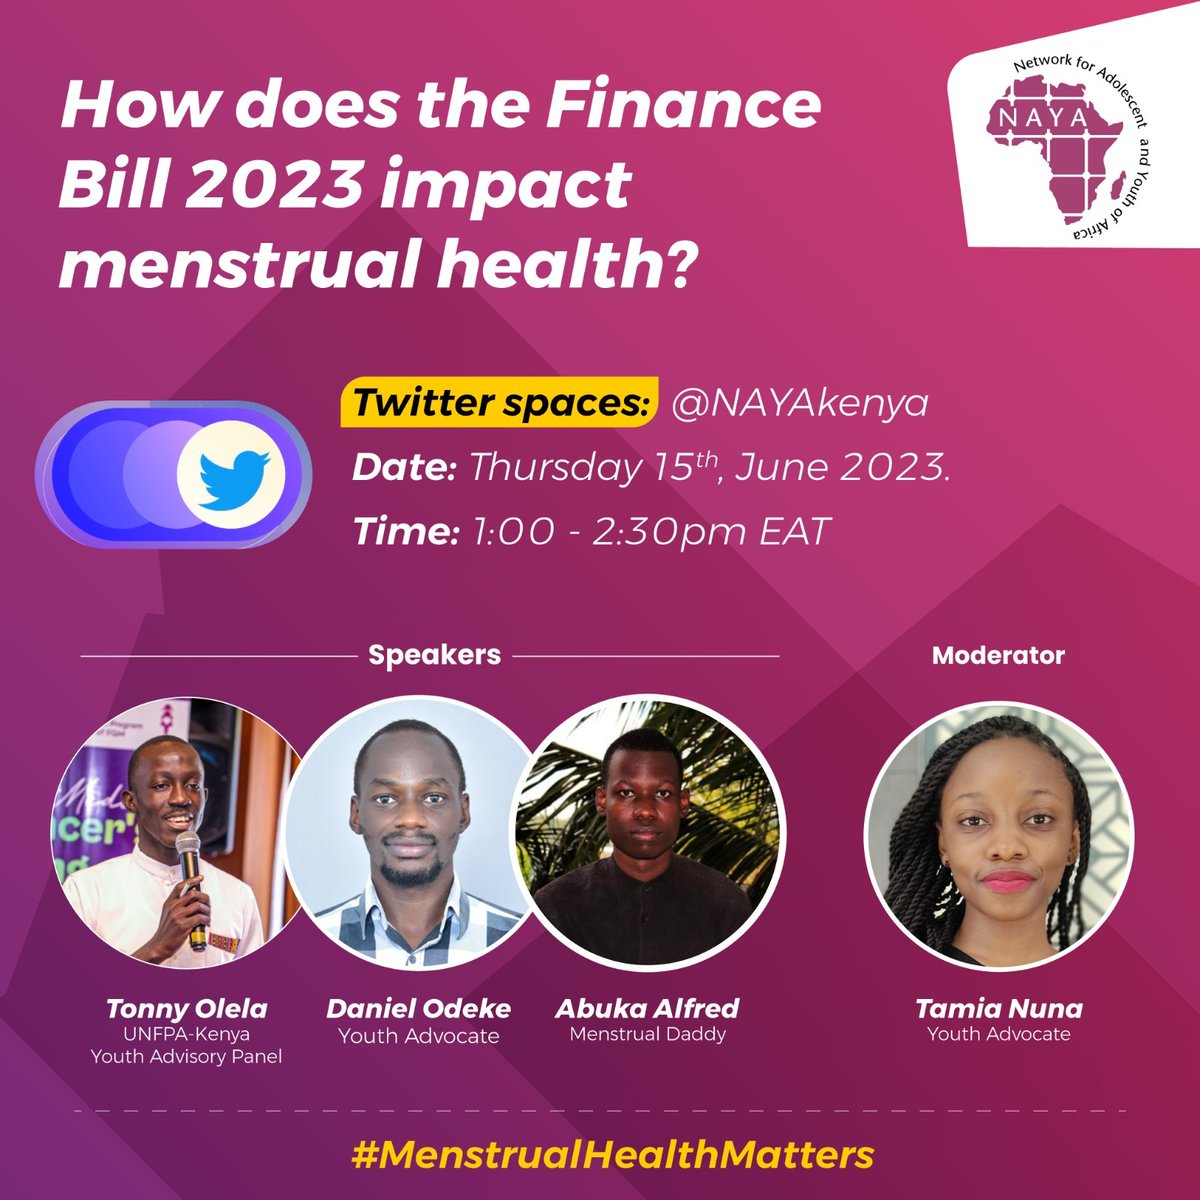 Join our next Twitter space with @NAYAKenya. The topic of discussion is How does the Finance Bill 2023 impact menstrual health? You're all invited to join us today from 1:00 - 2:30pm
#MenstrualHealthMatters

⏰ June 15th, 1:00- 2:30PM EAT